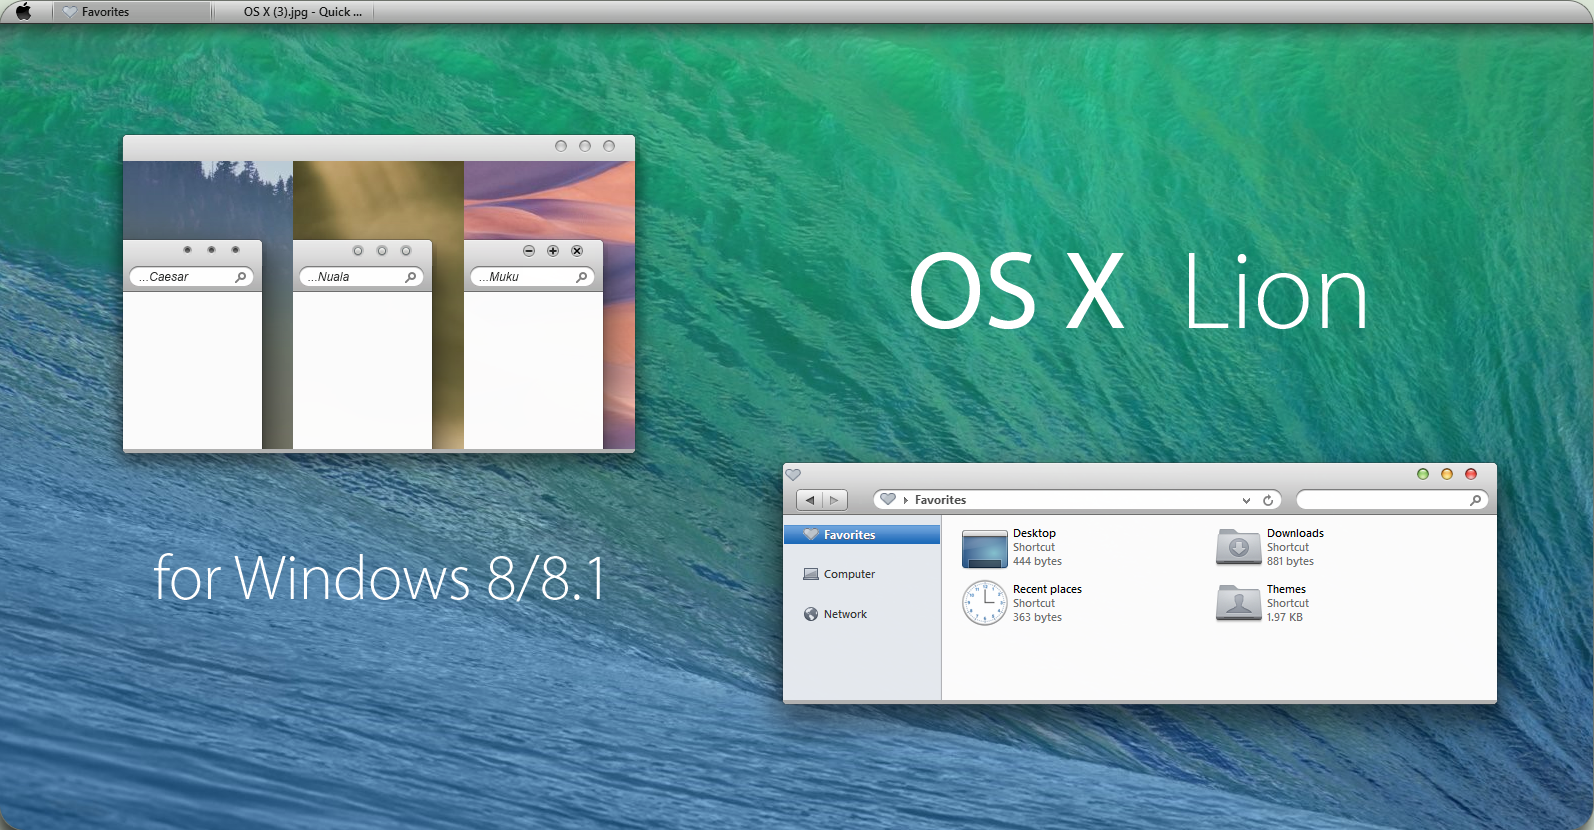 mac os x lion iso image download for vmware 14.0.0